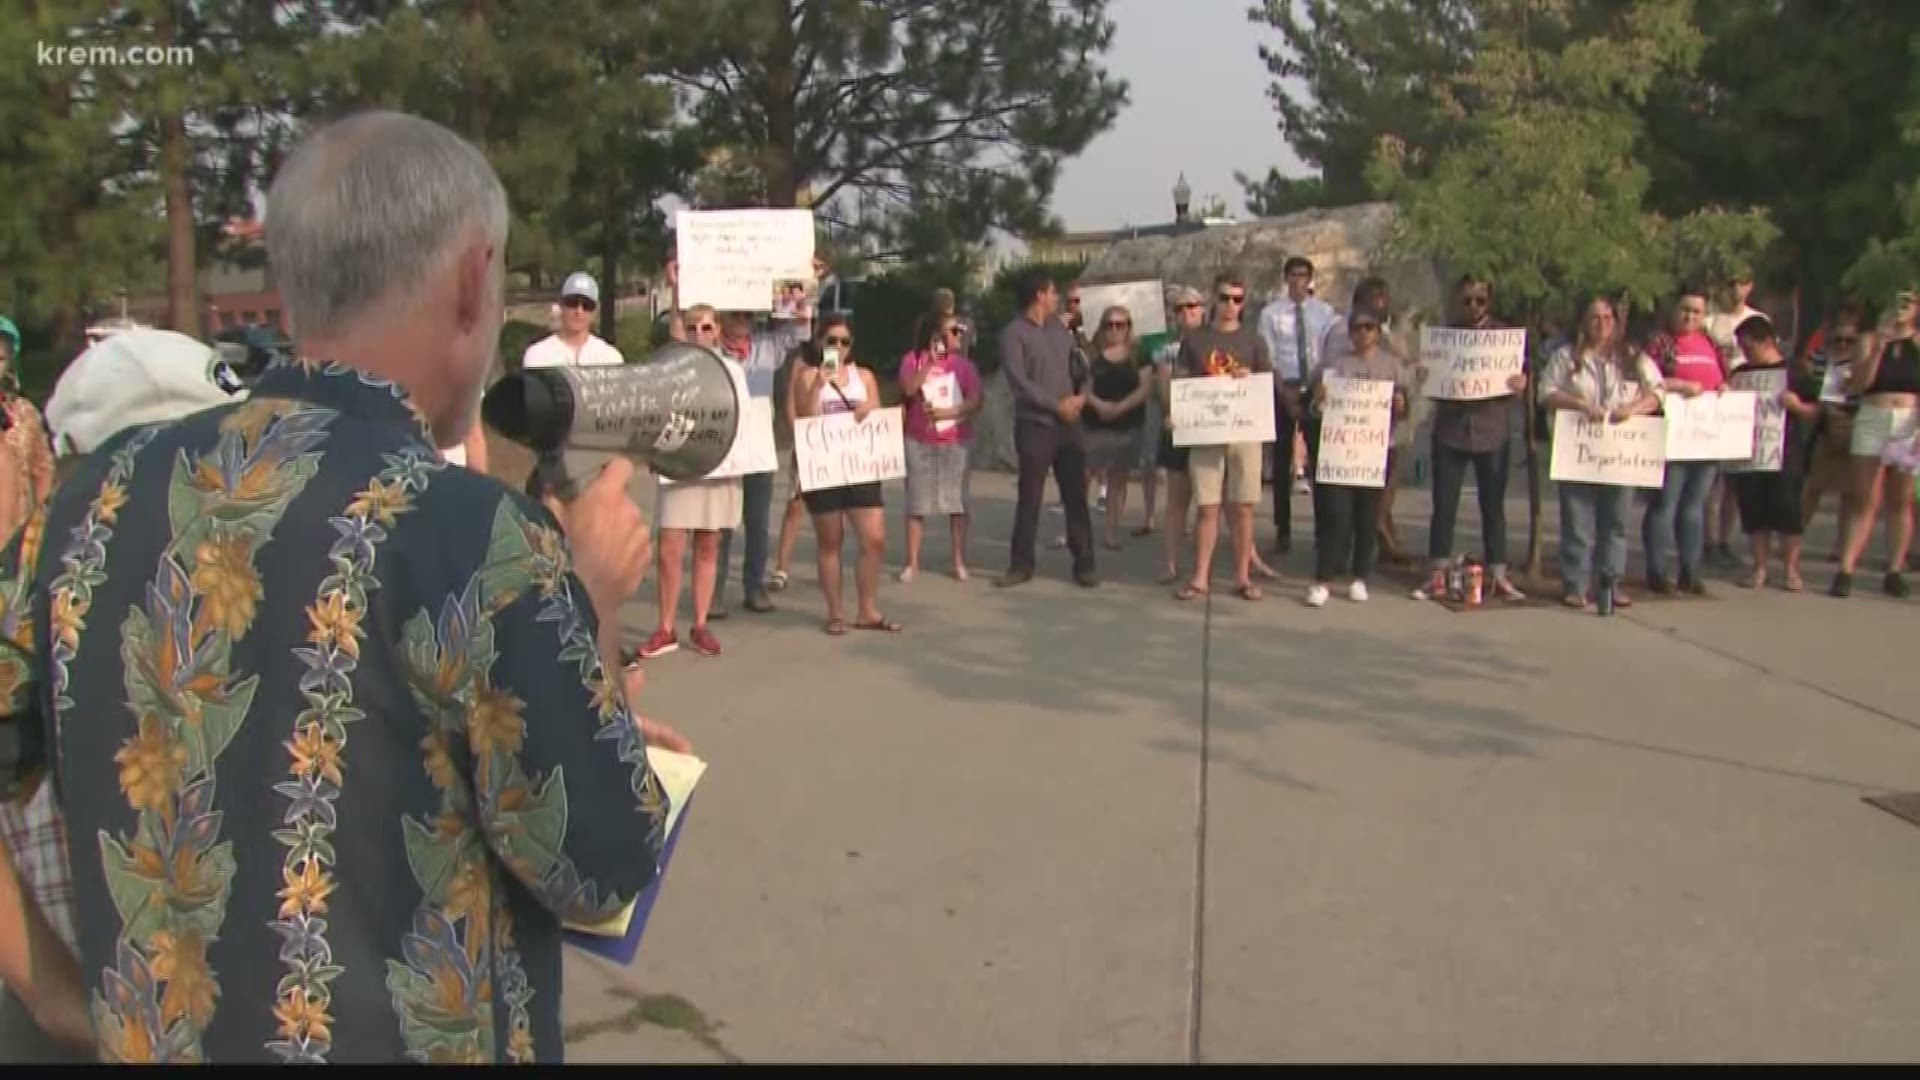 Protesters in Spokane rally against ICE and border patrol (8-15-18)